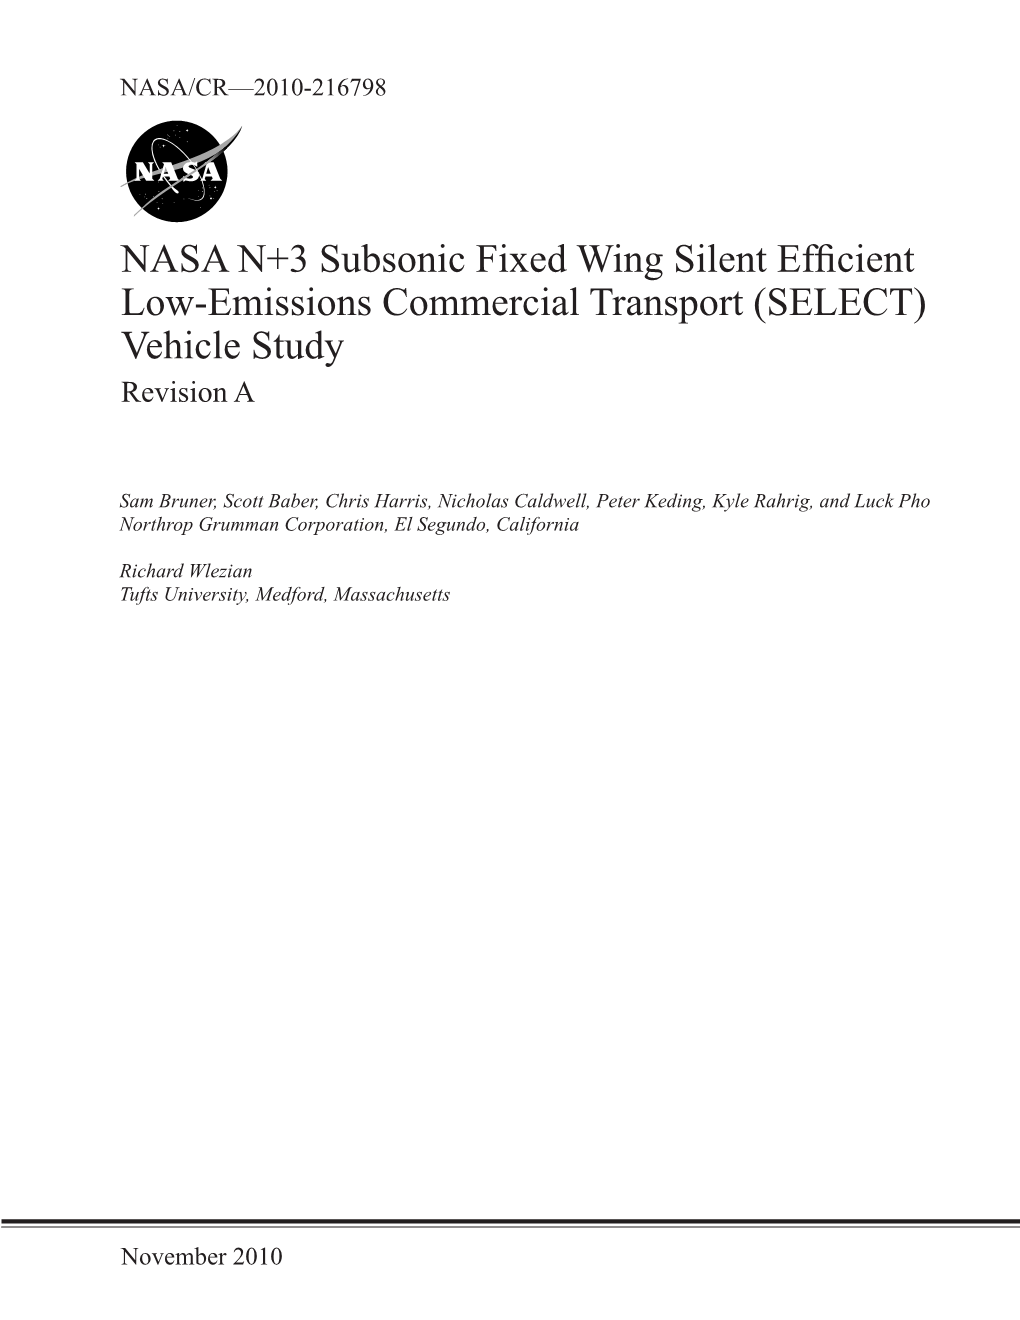 NASA N+3 Subsonic Fixed Wing Silent Efficient Low-Emissions Commercial Transport NNC08CA86C (SELECT) Vehicle Study 5B